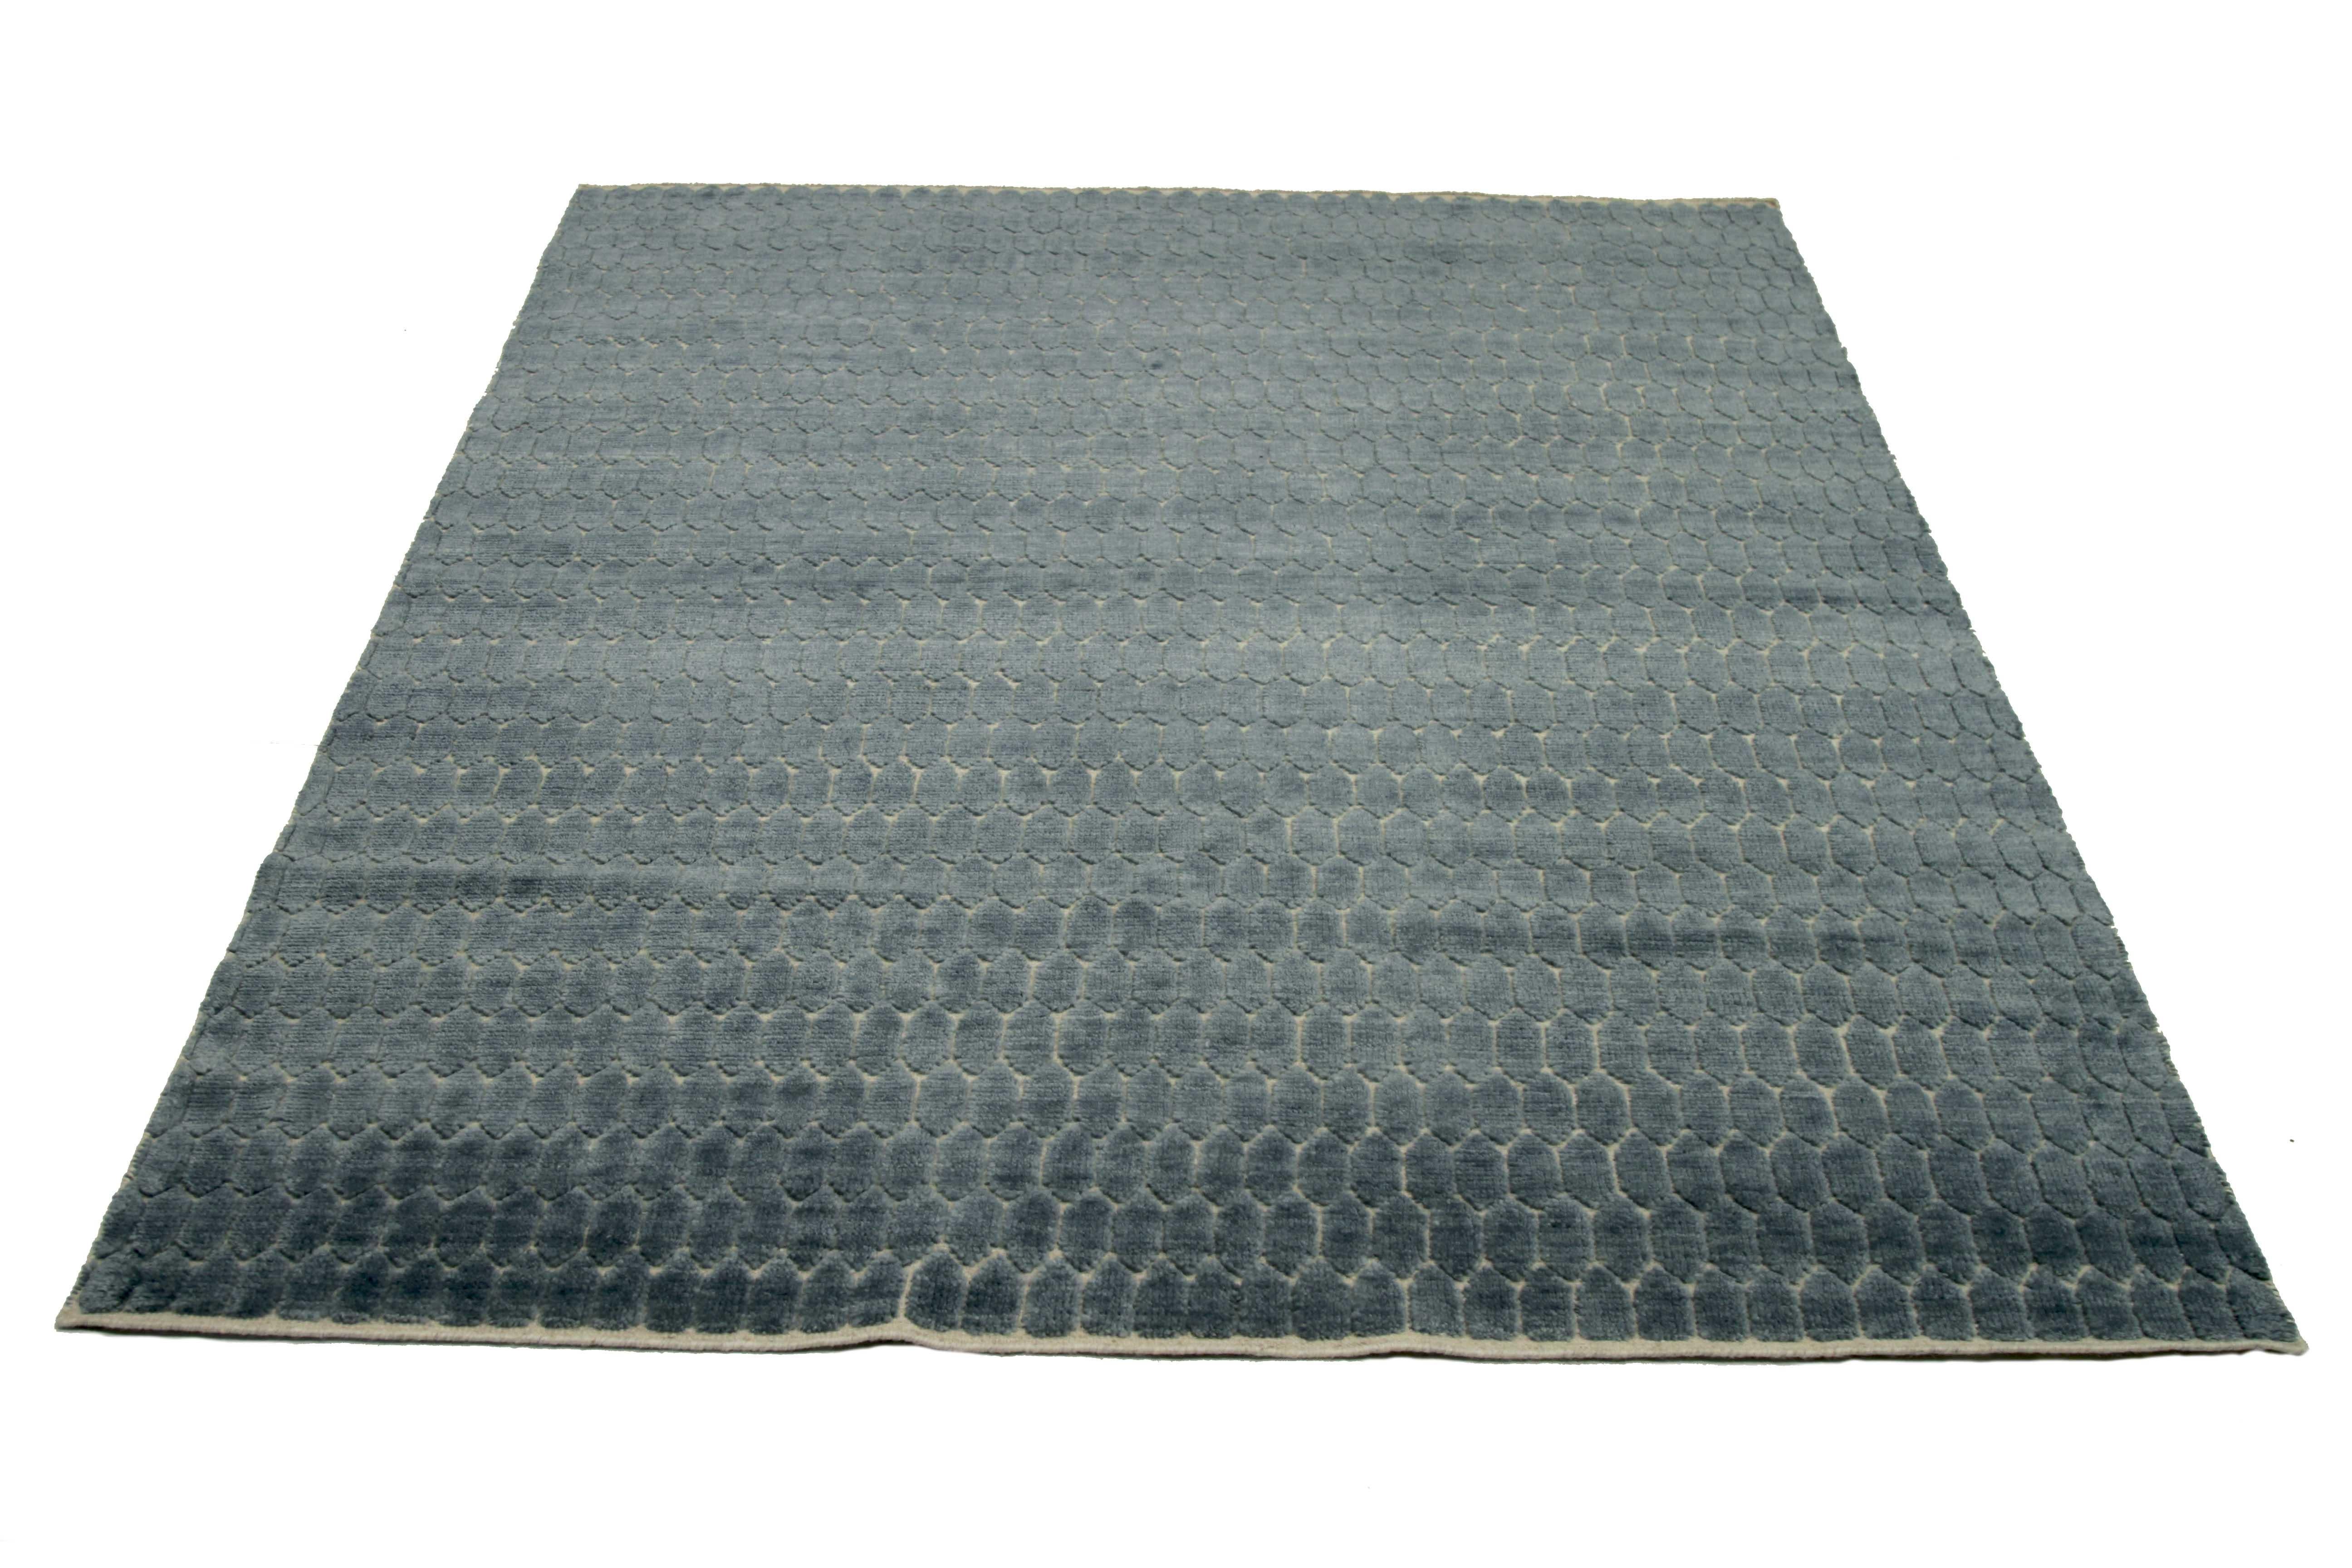 New area rug handwoven from the finest sheep’s wool. It’s colored with all-natural vegetable dyes that are safe for humans and pets. It has a nice 6’ x 8’ dimension that works perfectly in small to medium-sized rooms. 

Cameron collection is our